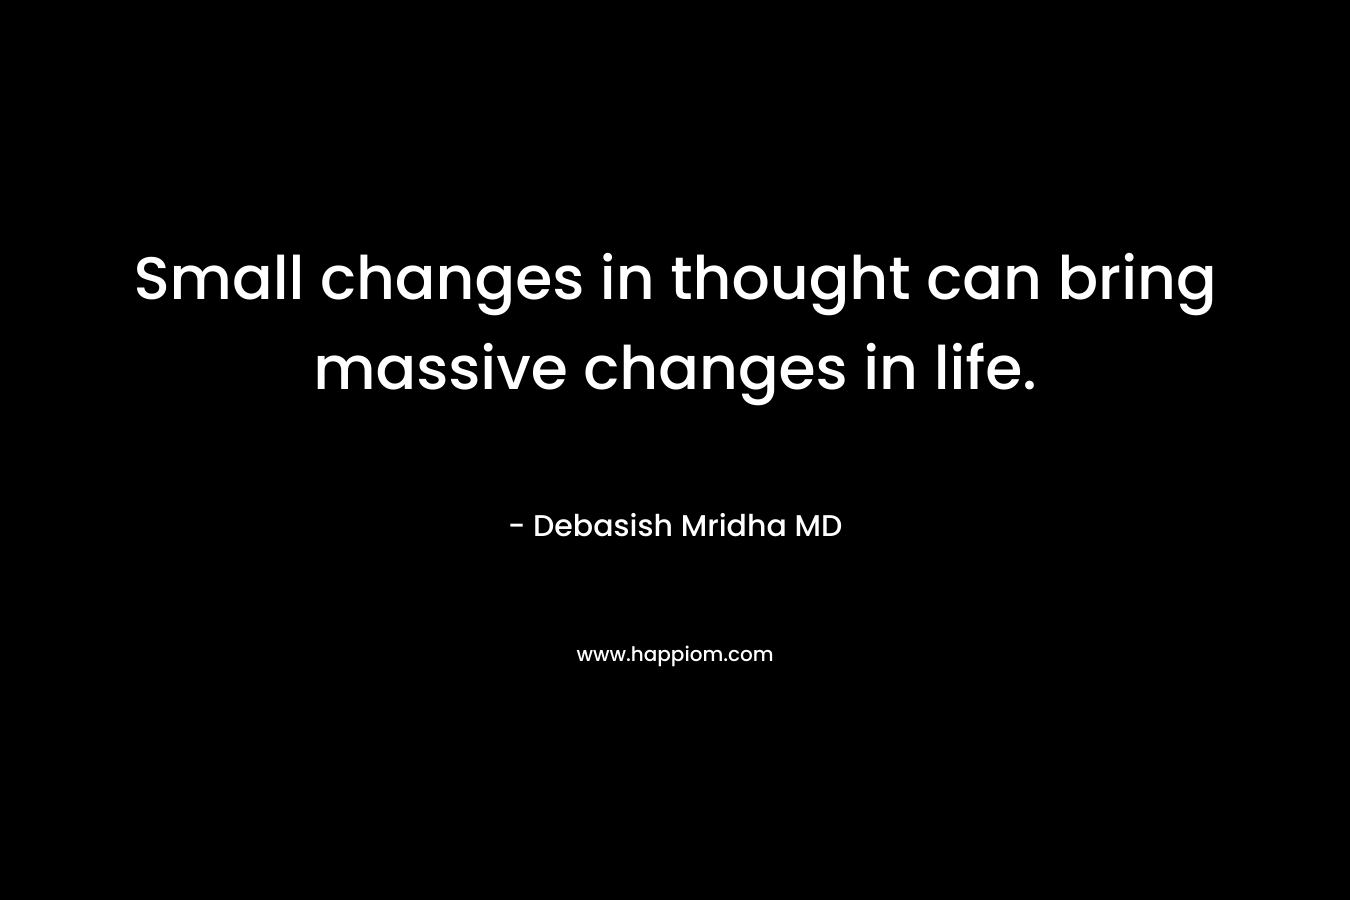 Small changes in thought can bring massive changes in life.